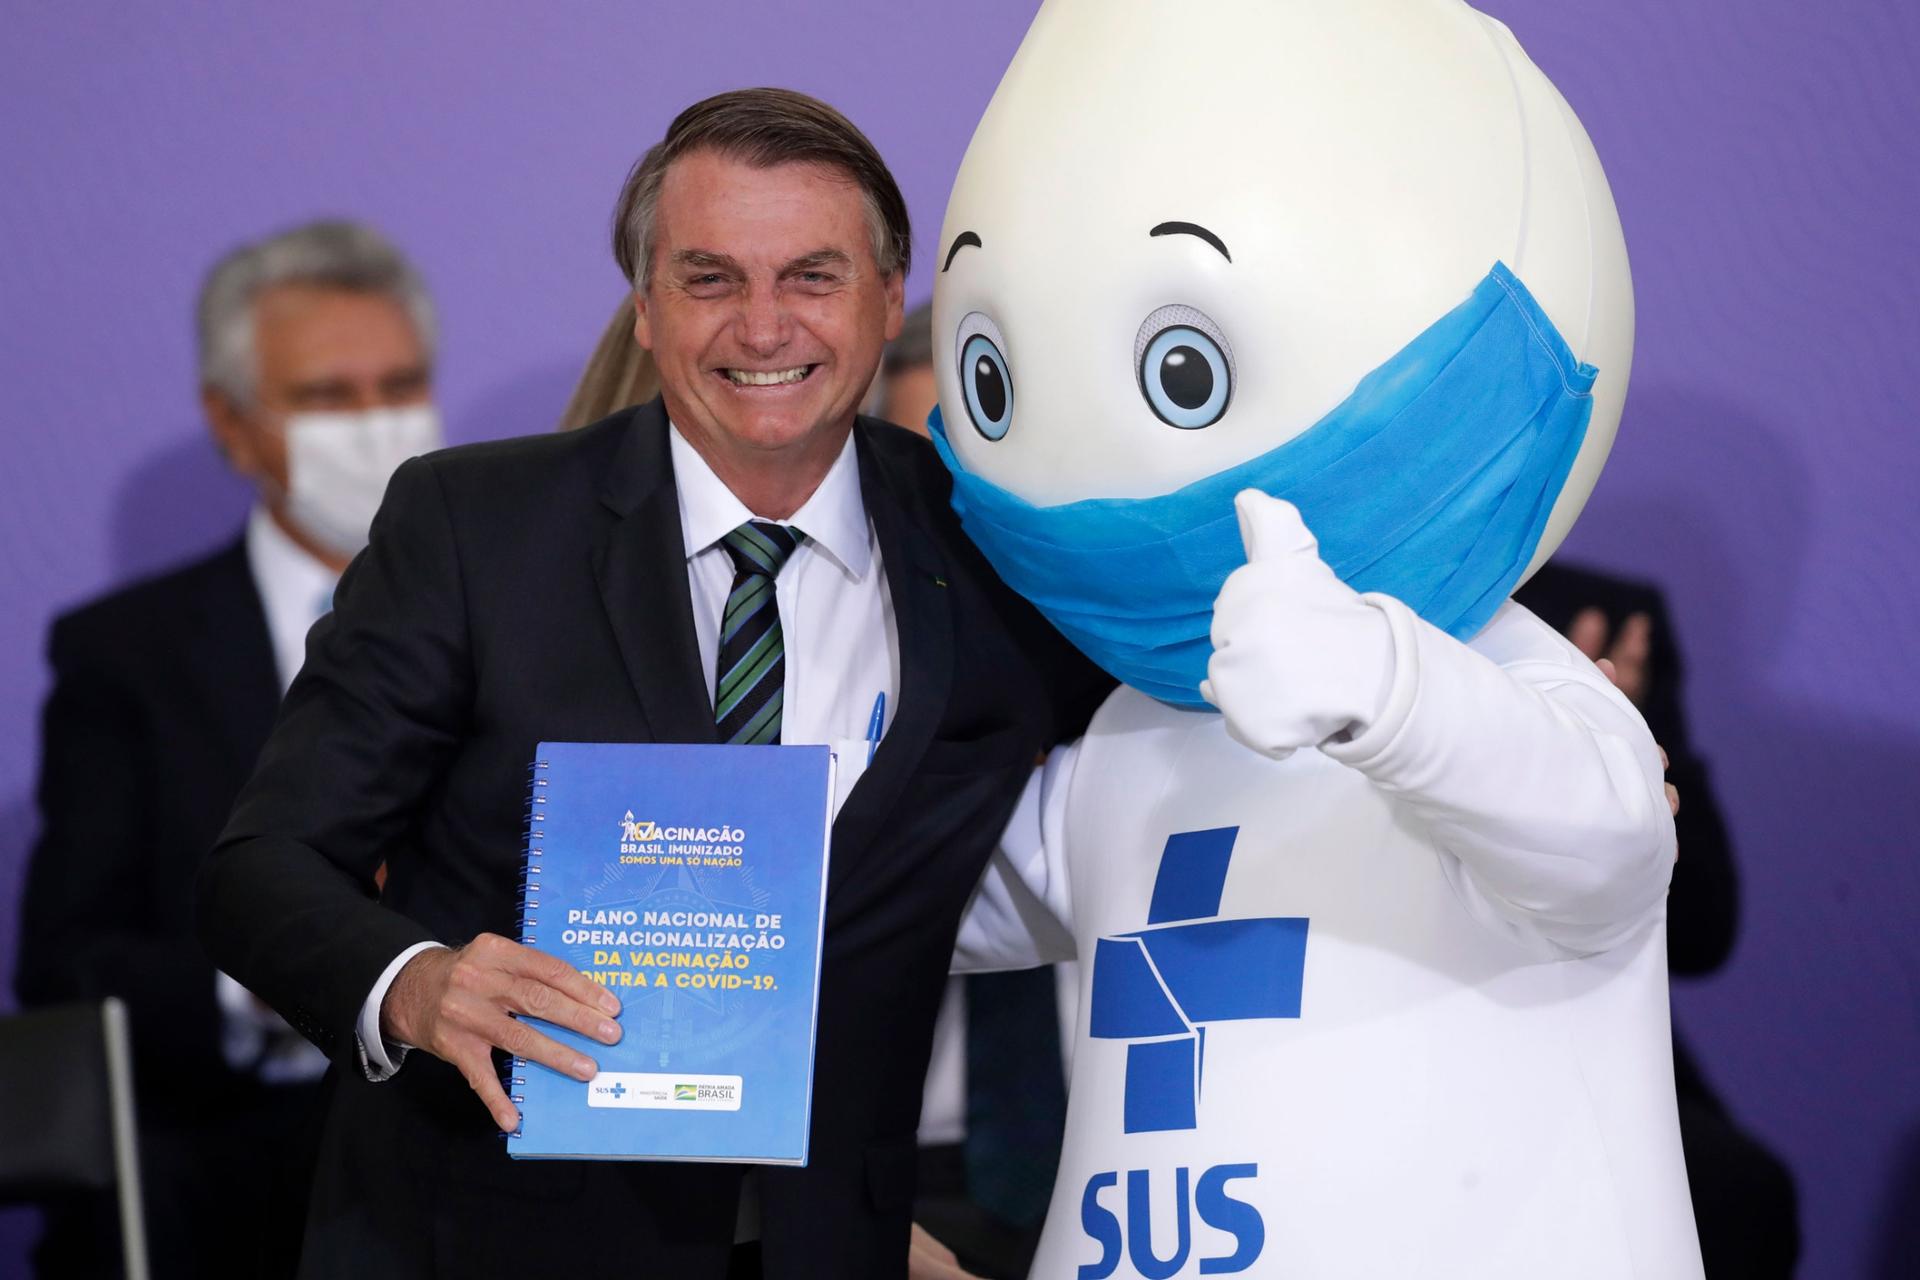 In this Dec. 16, 2020 file photo, Brazil's President Jair Bolsonaro poses for photos with the mascot of the nation's vaccination campaign, named "Zé Gotinha."